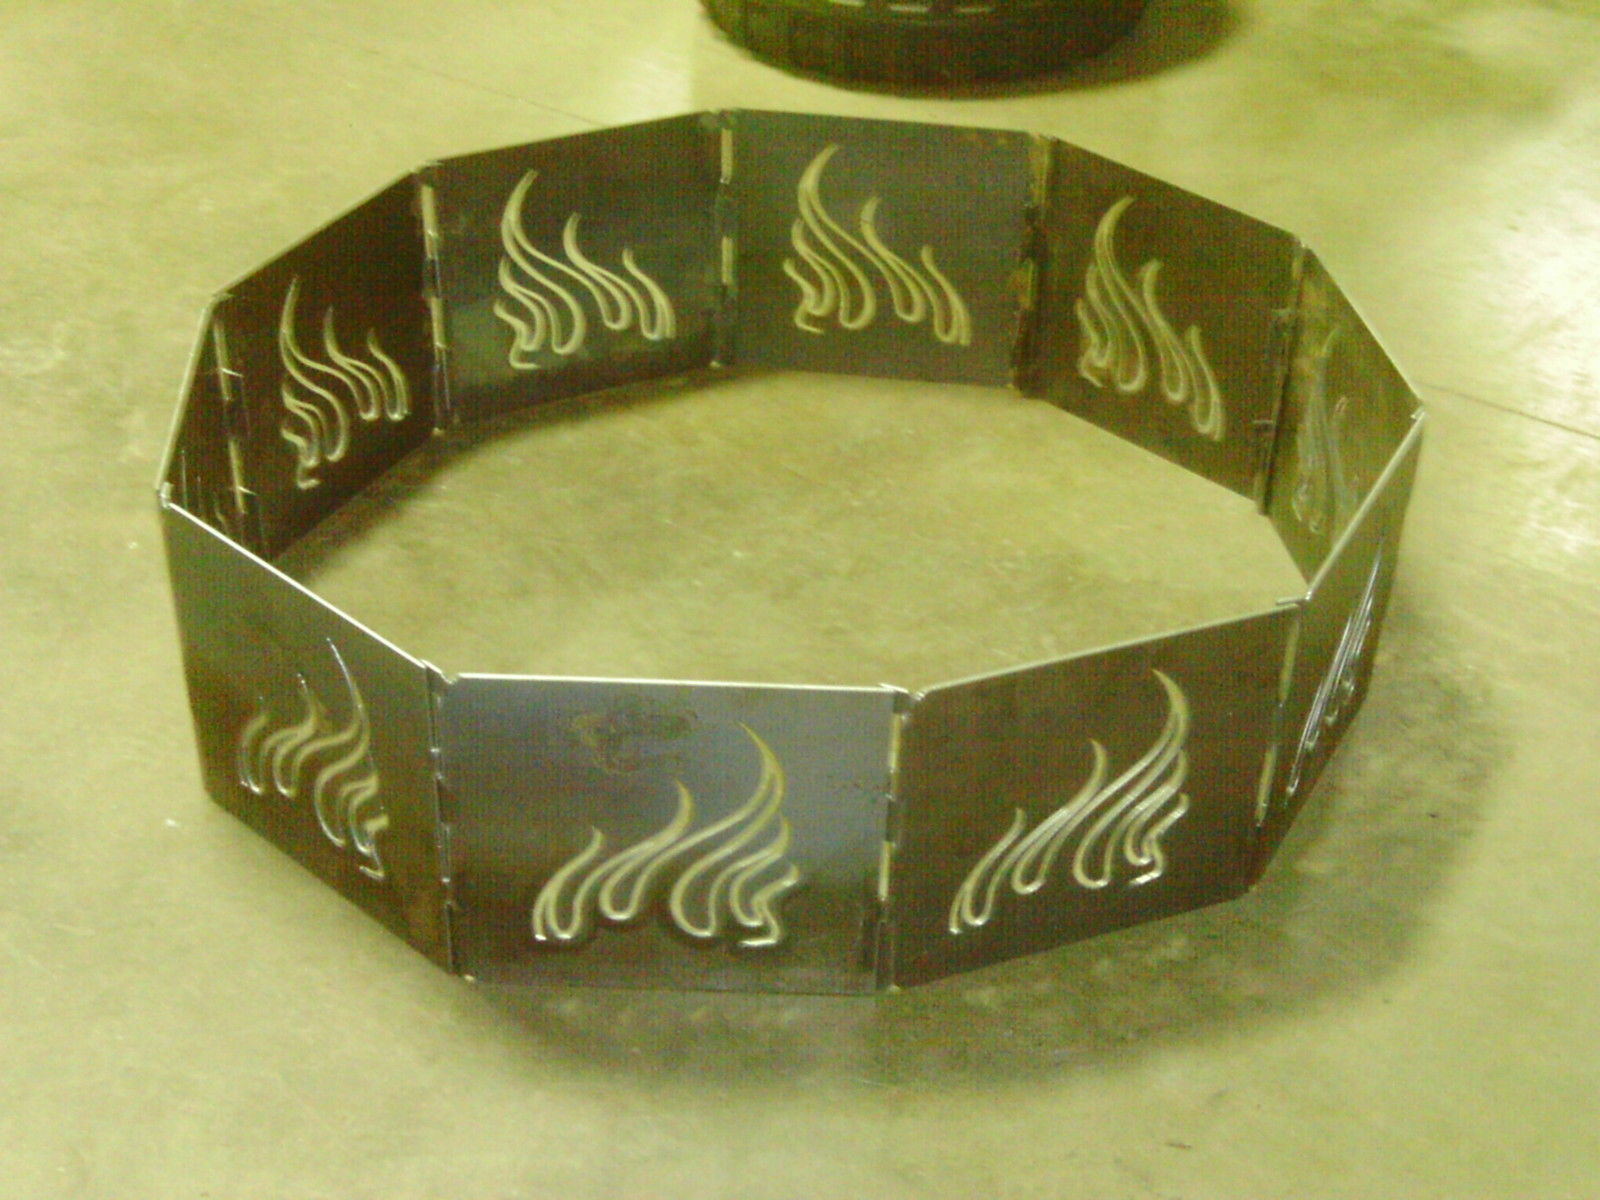 CAMPFIRE FIRE PIT RING 32